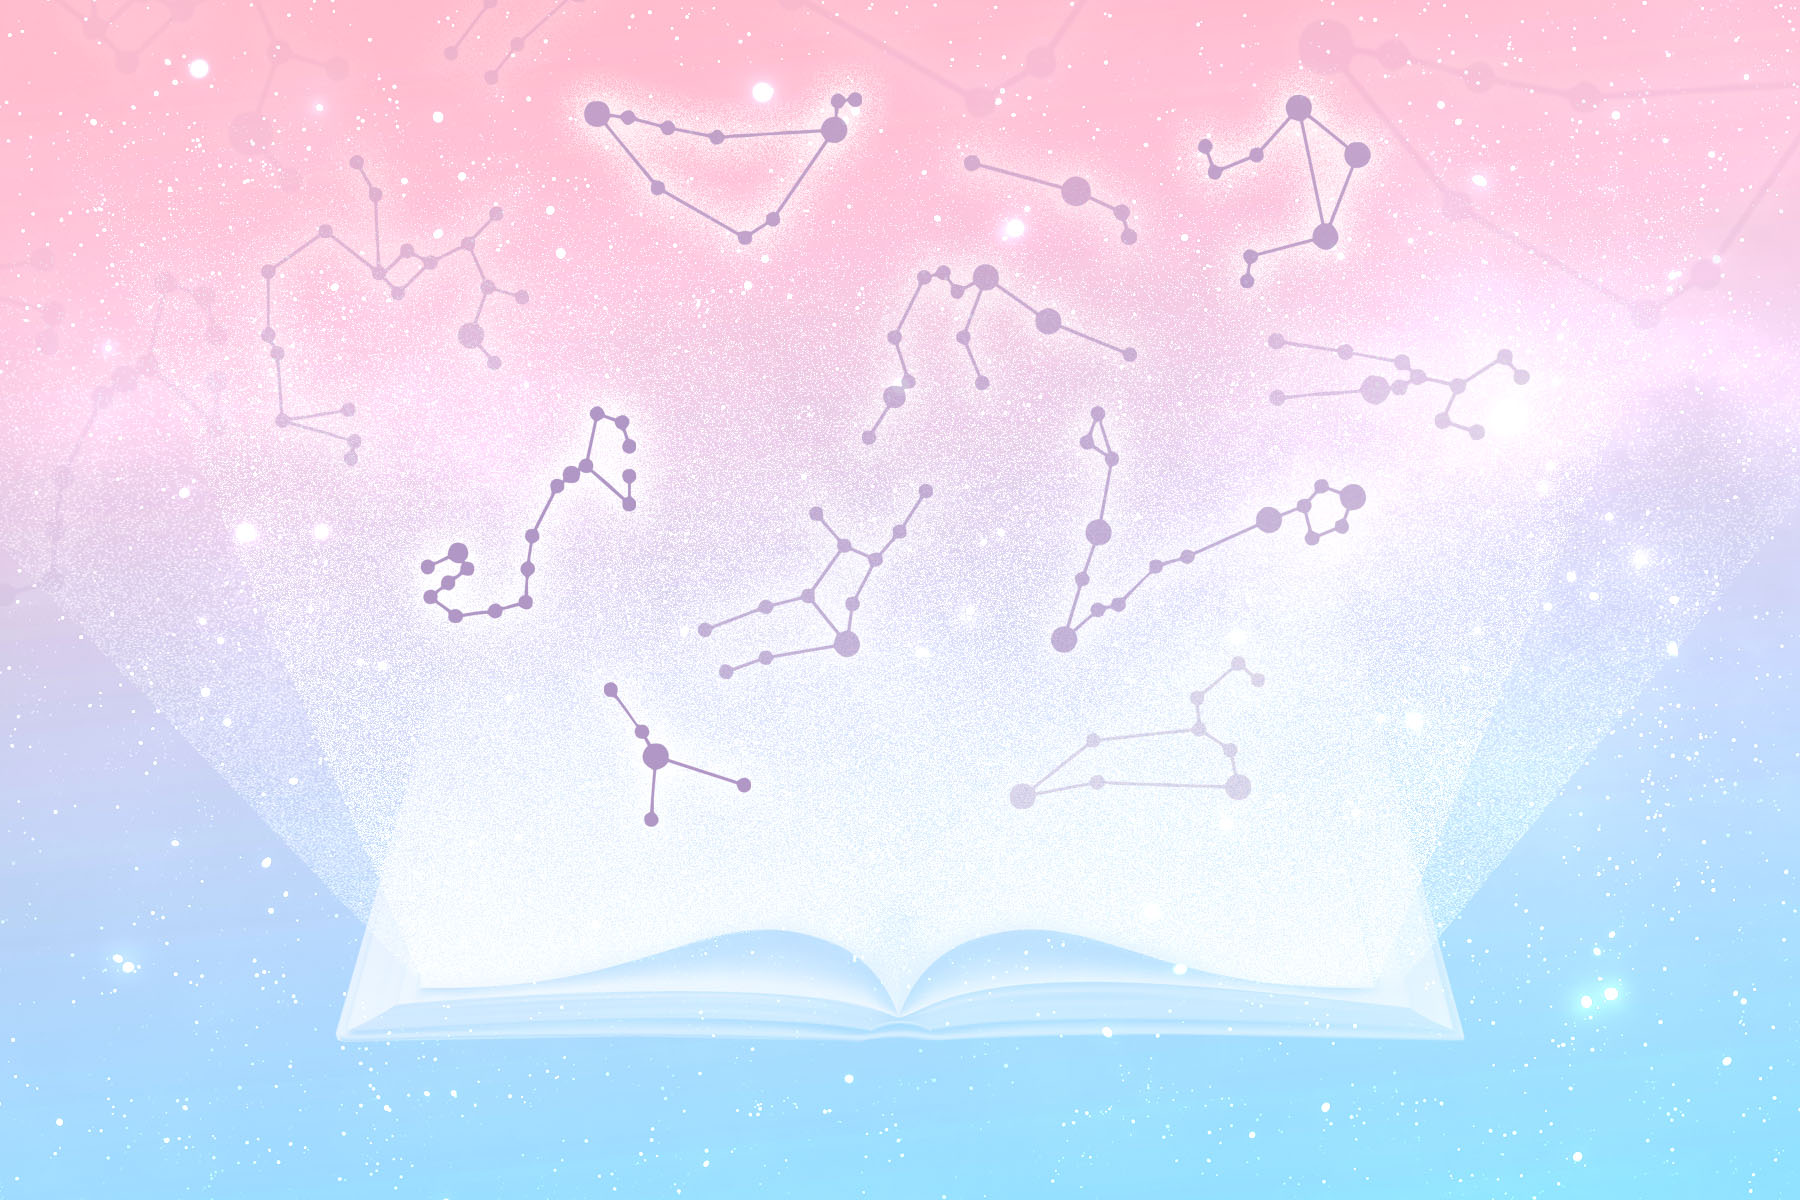 An illustration of an open book with constellations floating above it against a pastel background